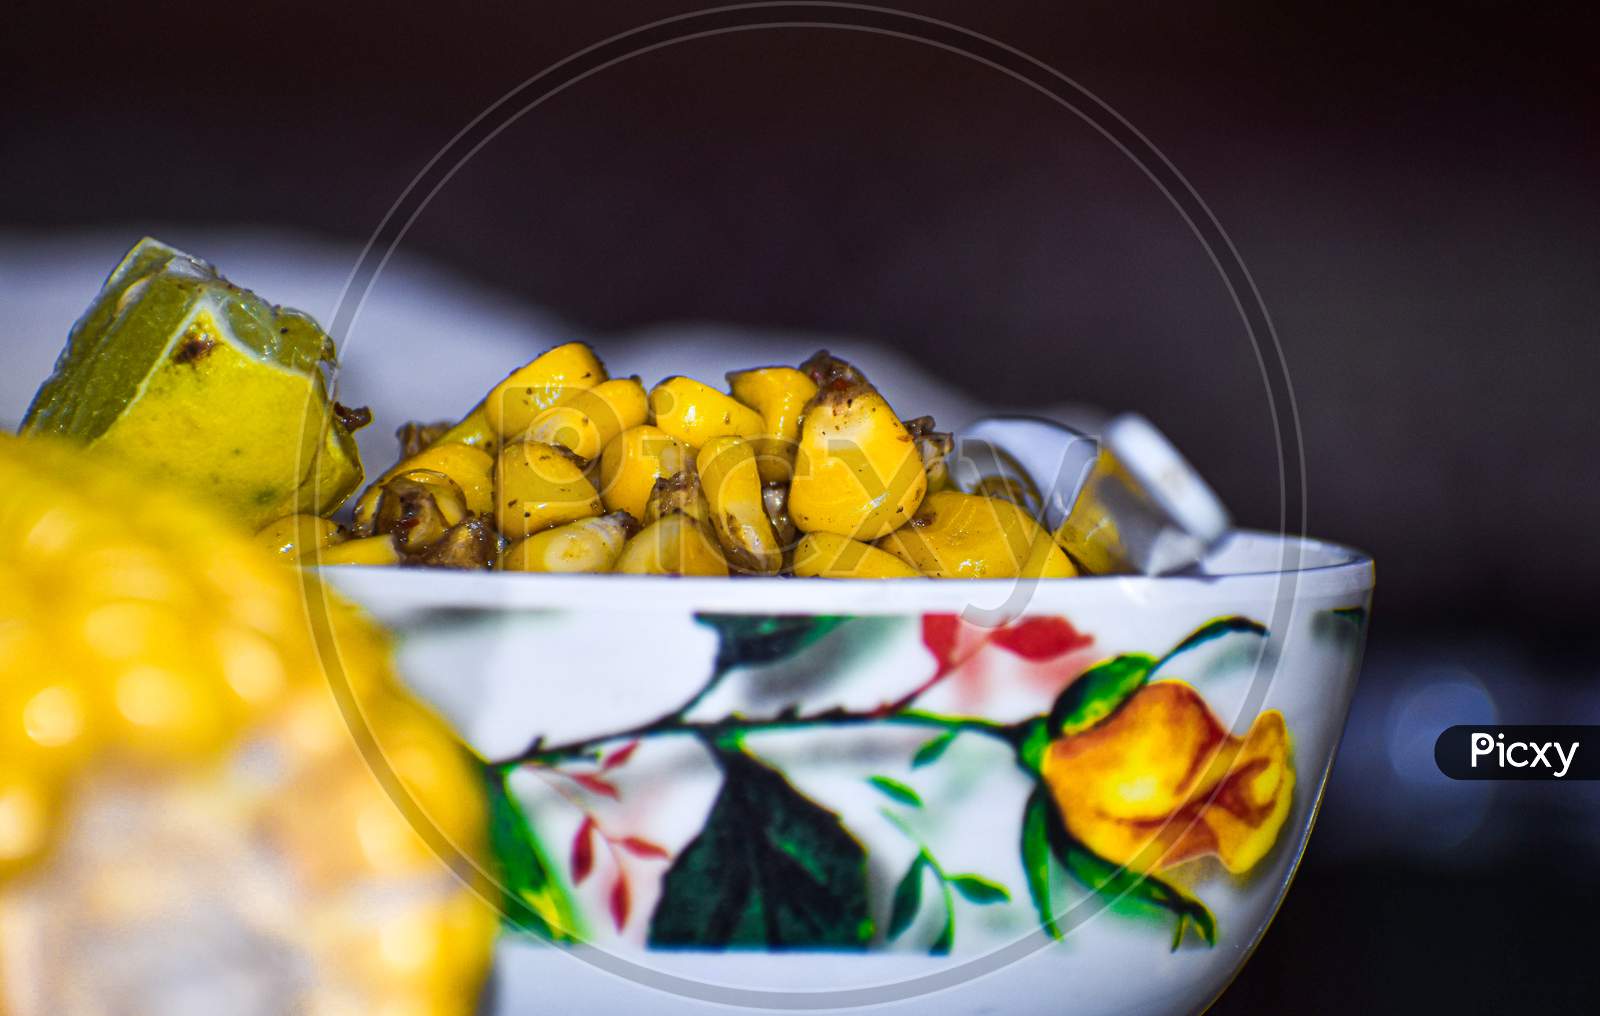 A Cup of sweet corn with maize